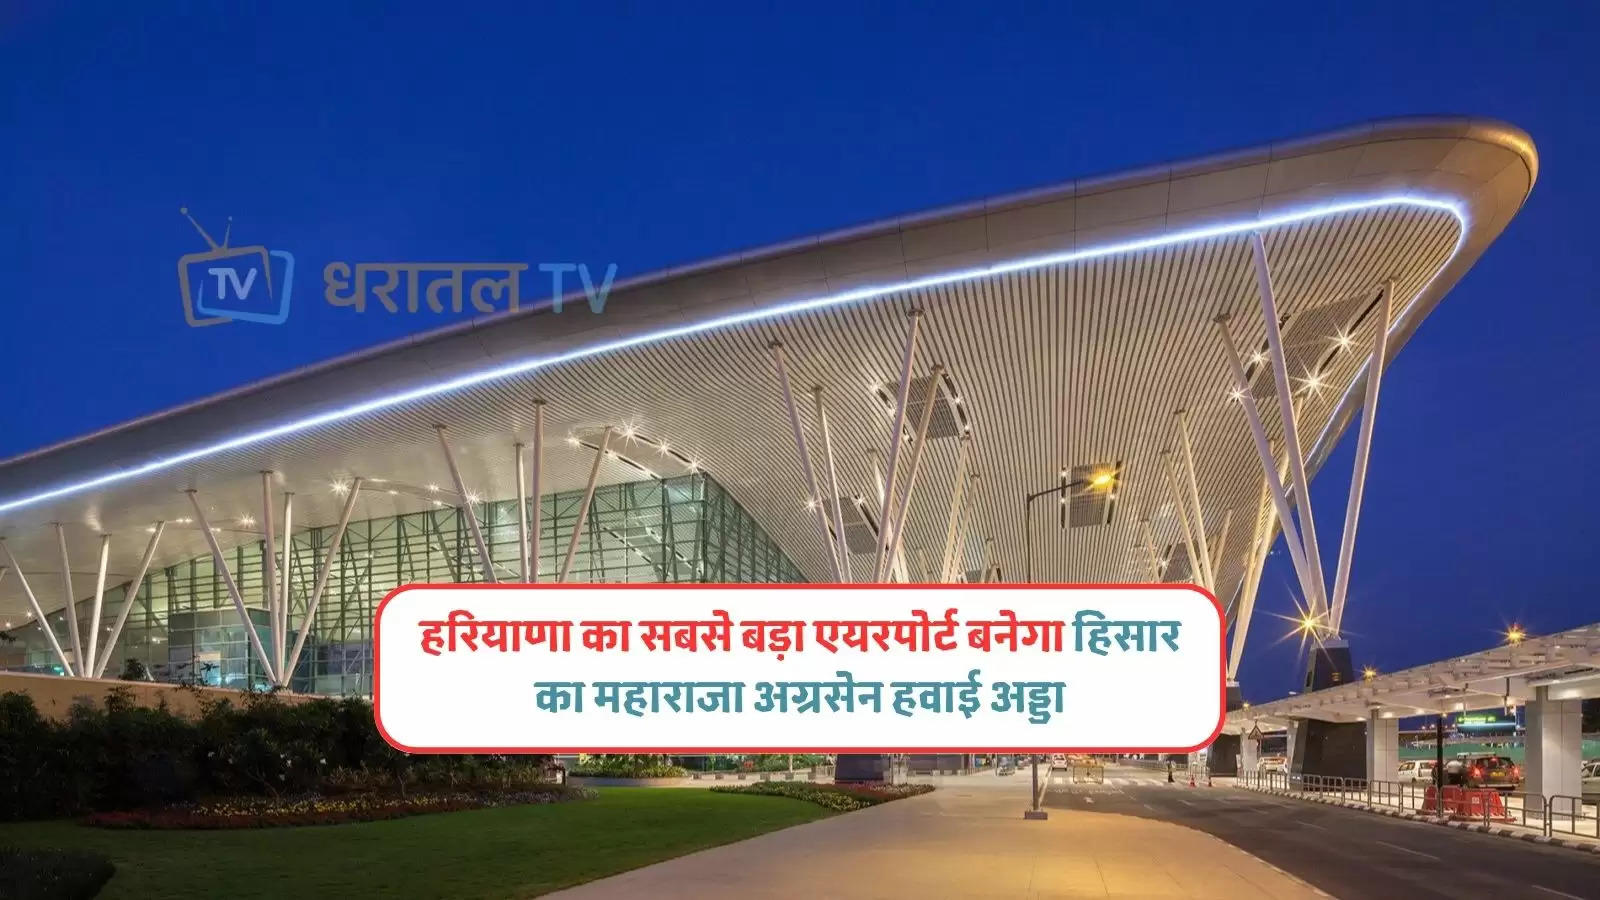 hisar airport new look revealed